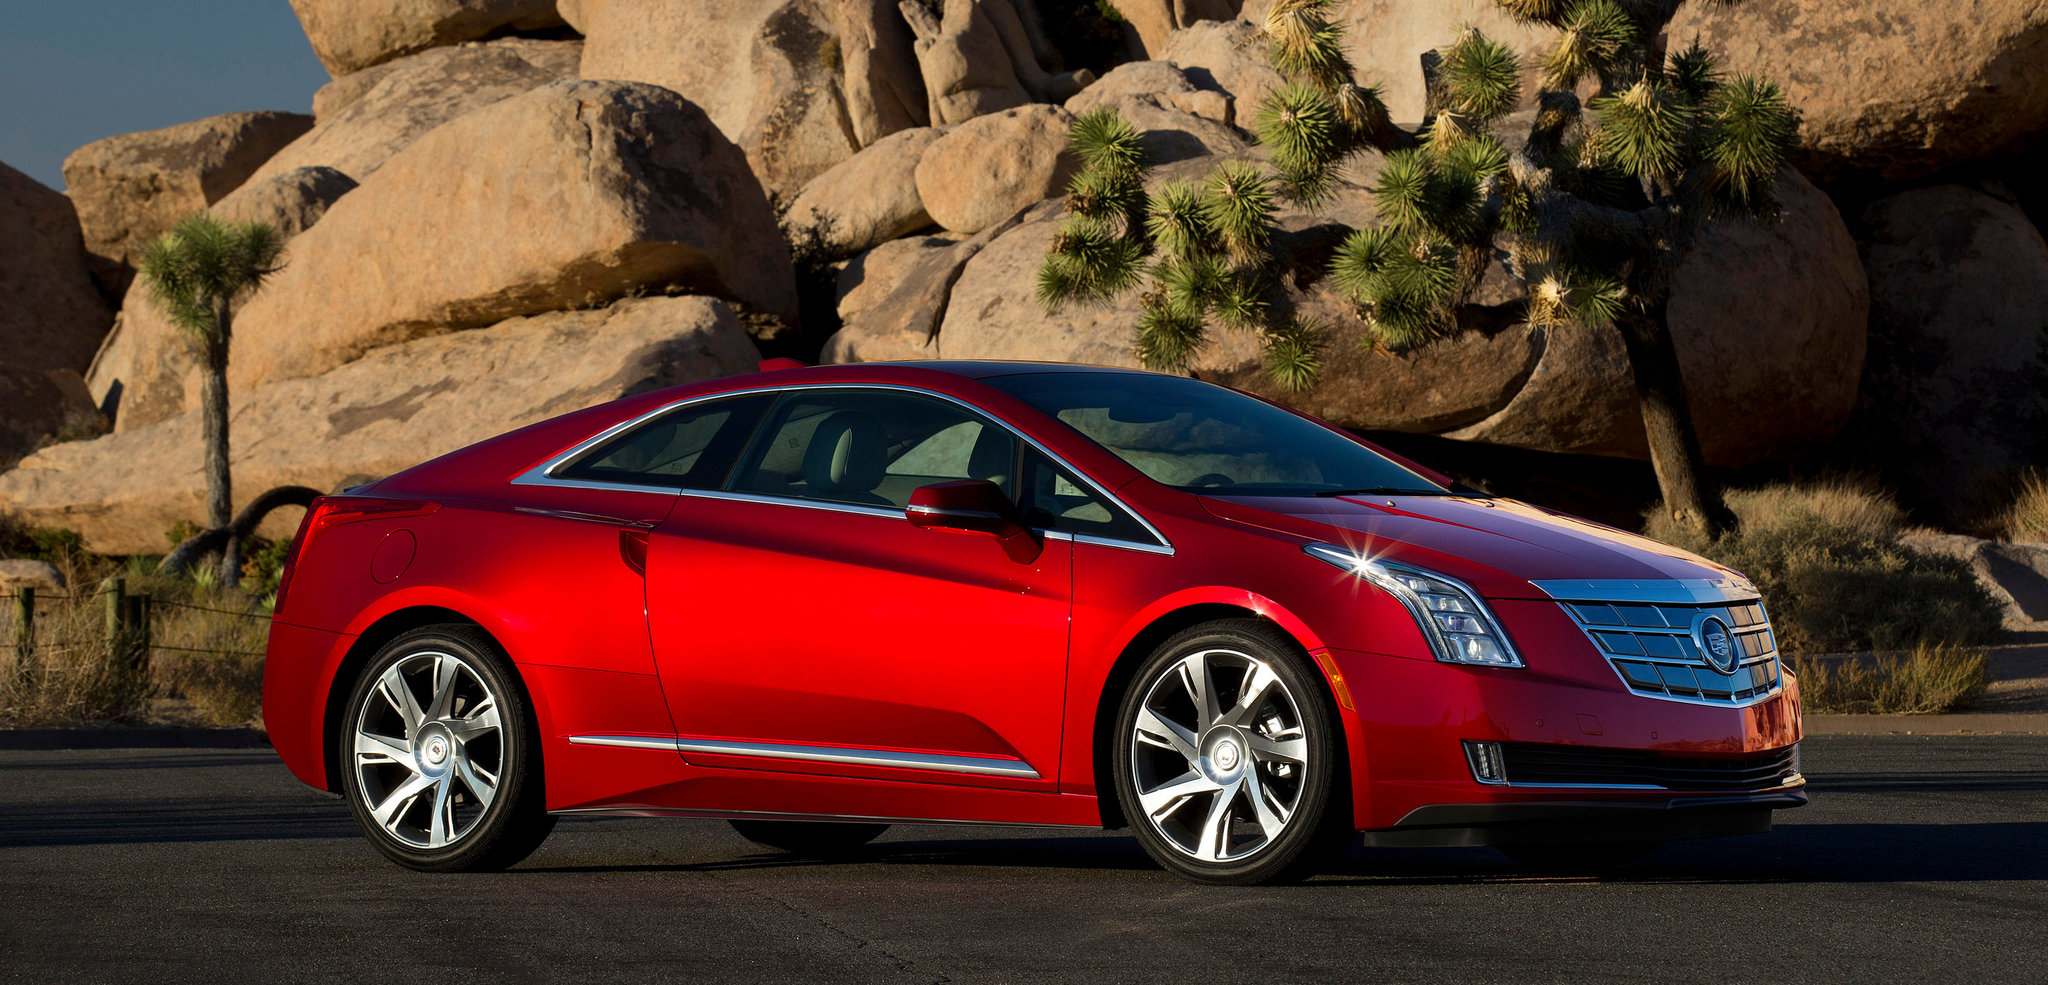 2014 Cadillac ELR Review - The New York Times